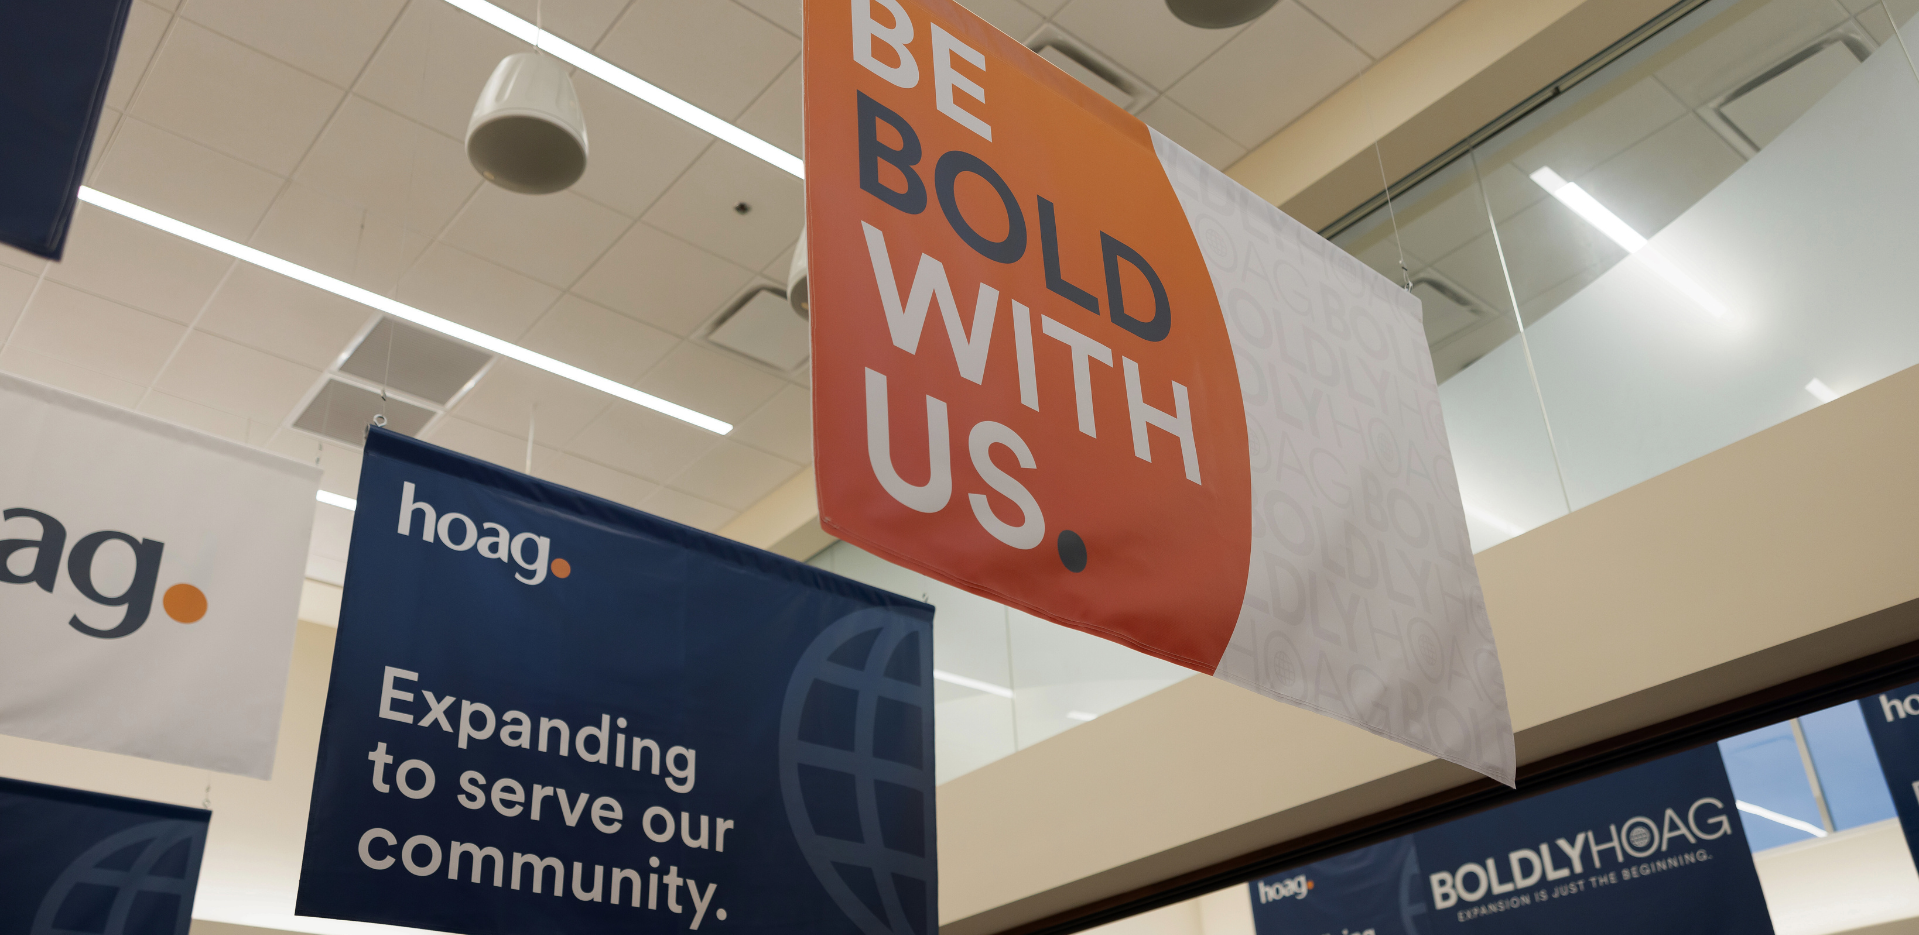 Hoag Hospital Foundation Launches Boldly Hoag Campaign in Support of Hoag’s Expansion Starting on the Sun Family Campus in Irvine